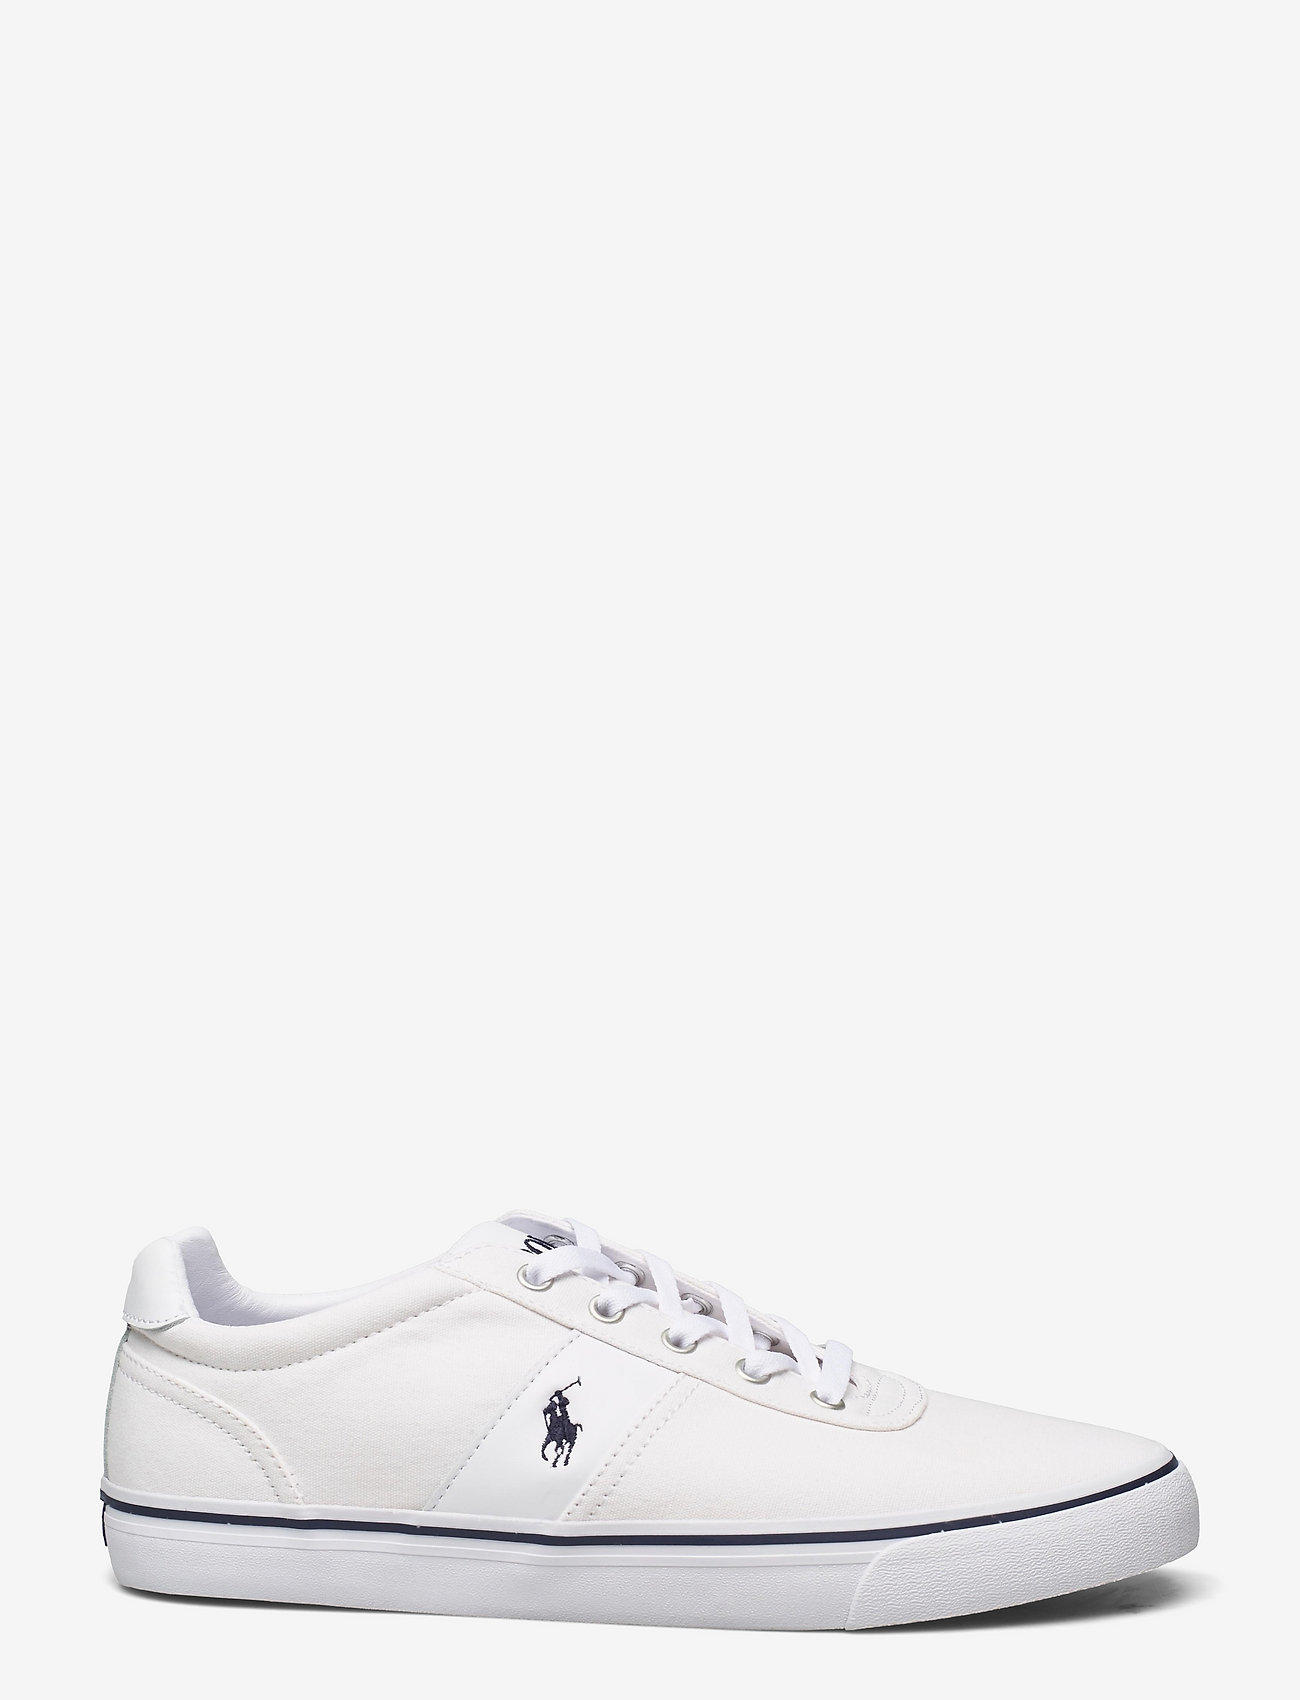 Polo Ralph Lauren - Hanford Canvas Sneaker - low tops - white/ navy pp - 1